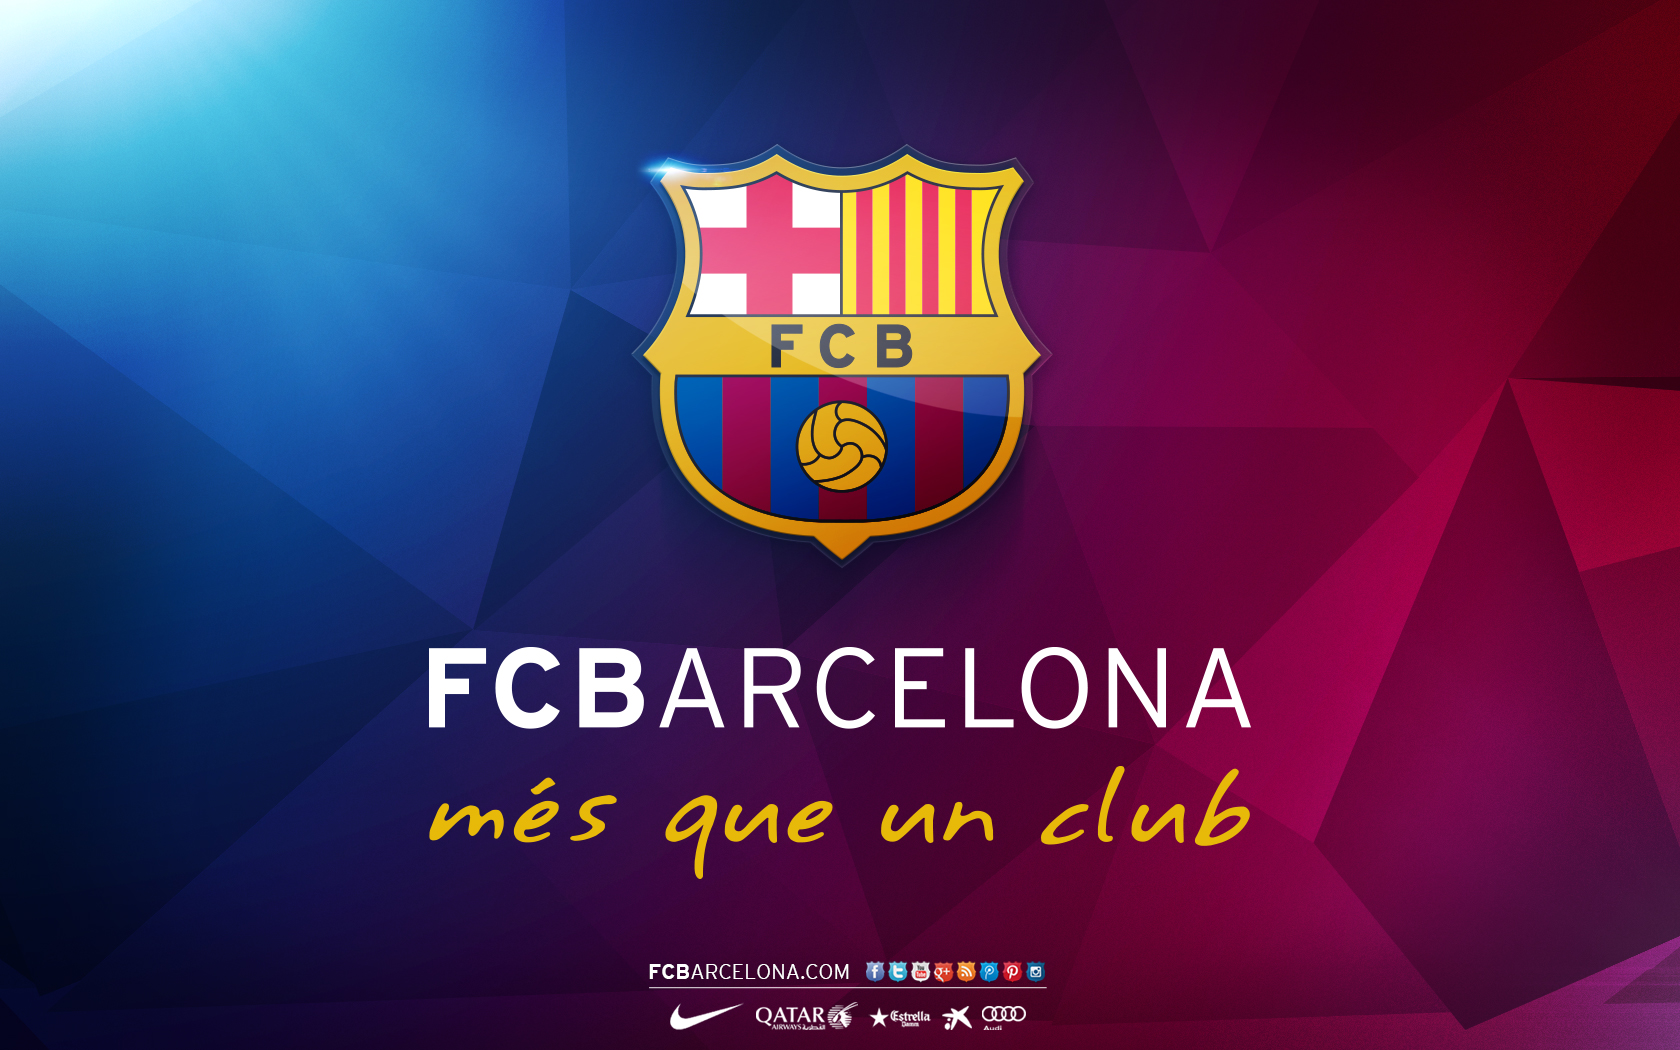 The Fcb Crest And Words Mes Que Un Club